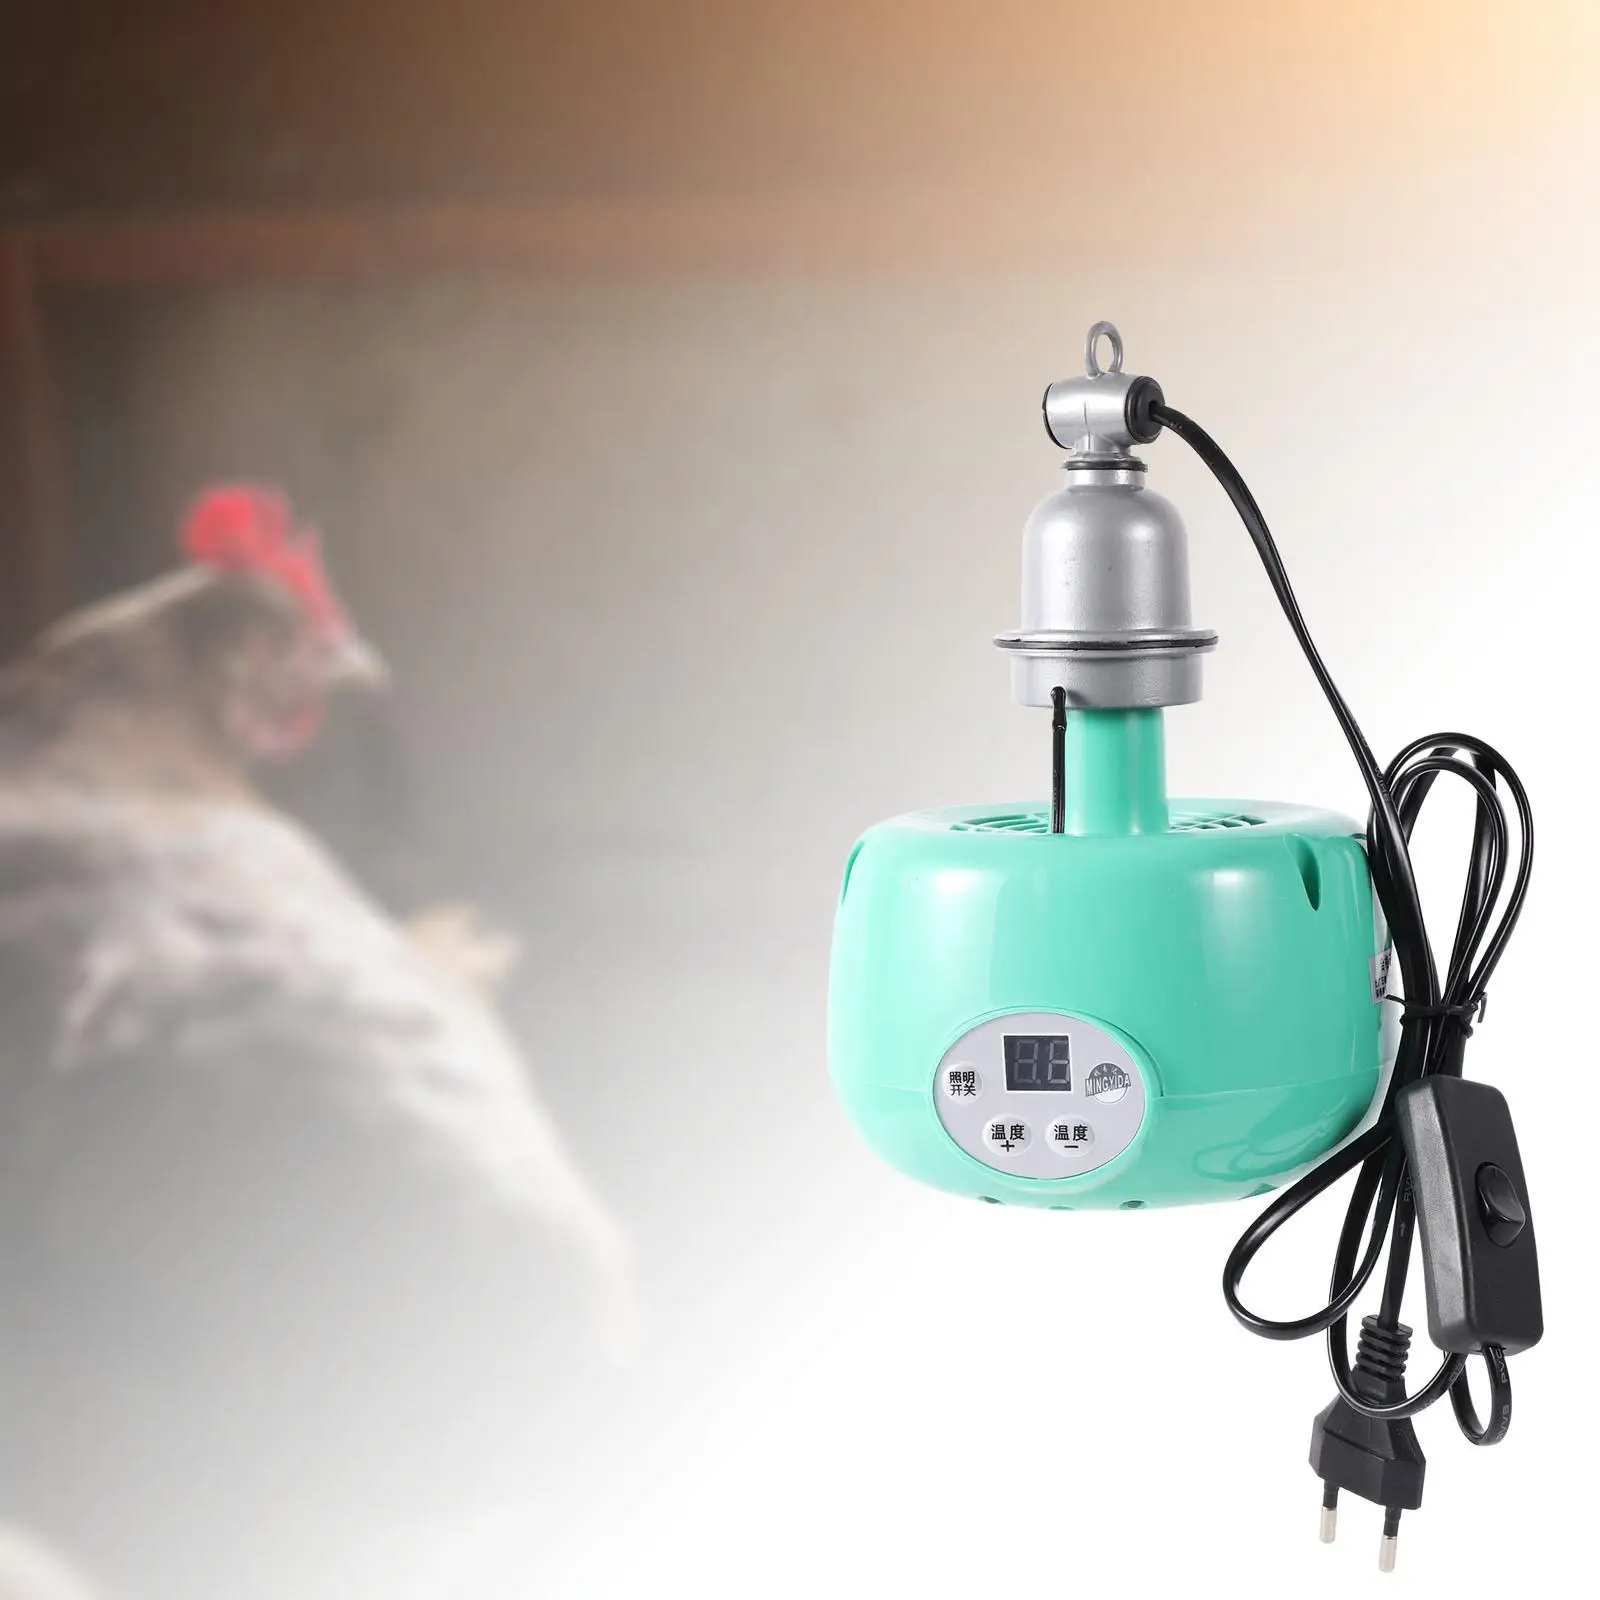 Adjustable Heat Lamp Animal Warm Light Incubator Tools 300W Brooder 220V E27 Heater for chicken Poultry Piglet